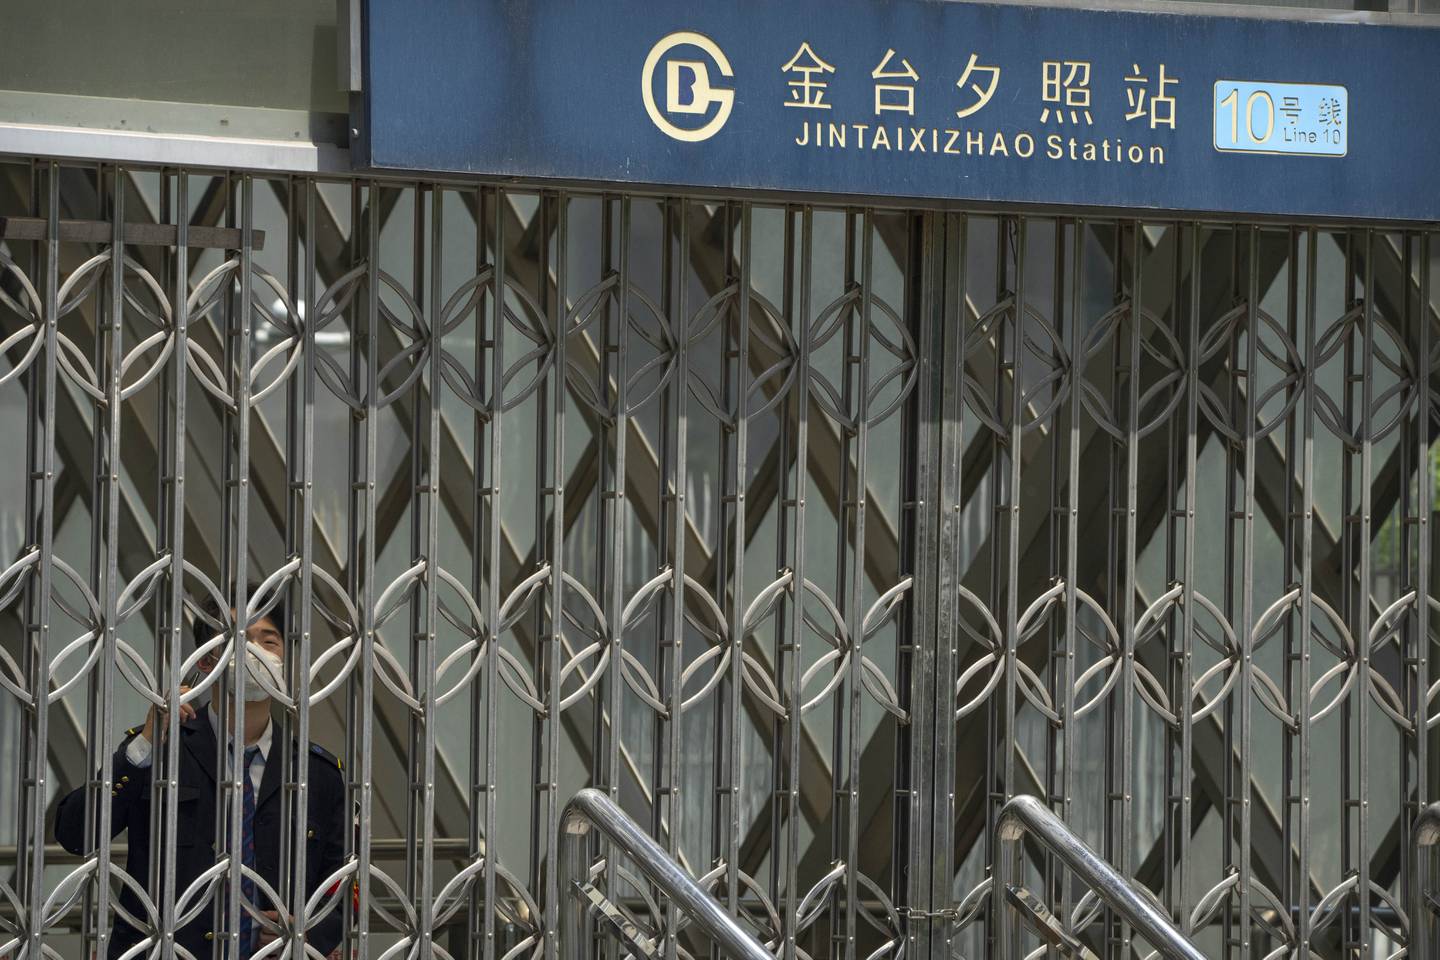 A masked member of staff at the gates of the closed subway station in Beijing on Wednesday. AP